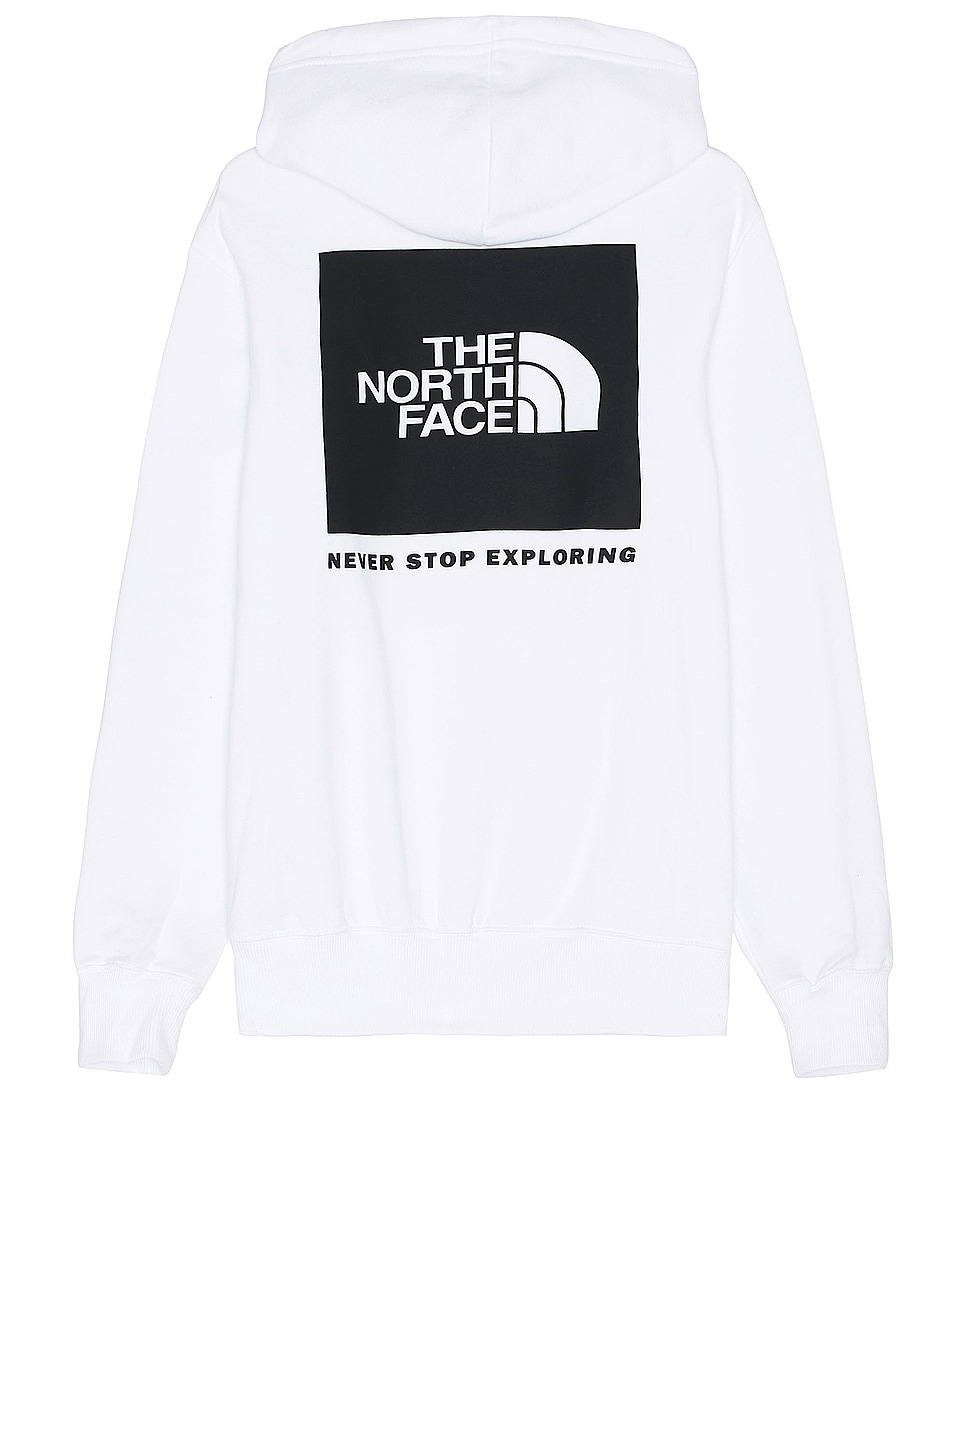 Image 1 of The North Face Box NSE Pullover Hoodie in TNF White & TNF Black